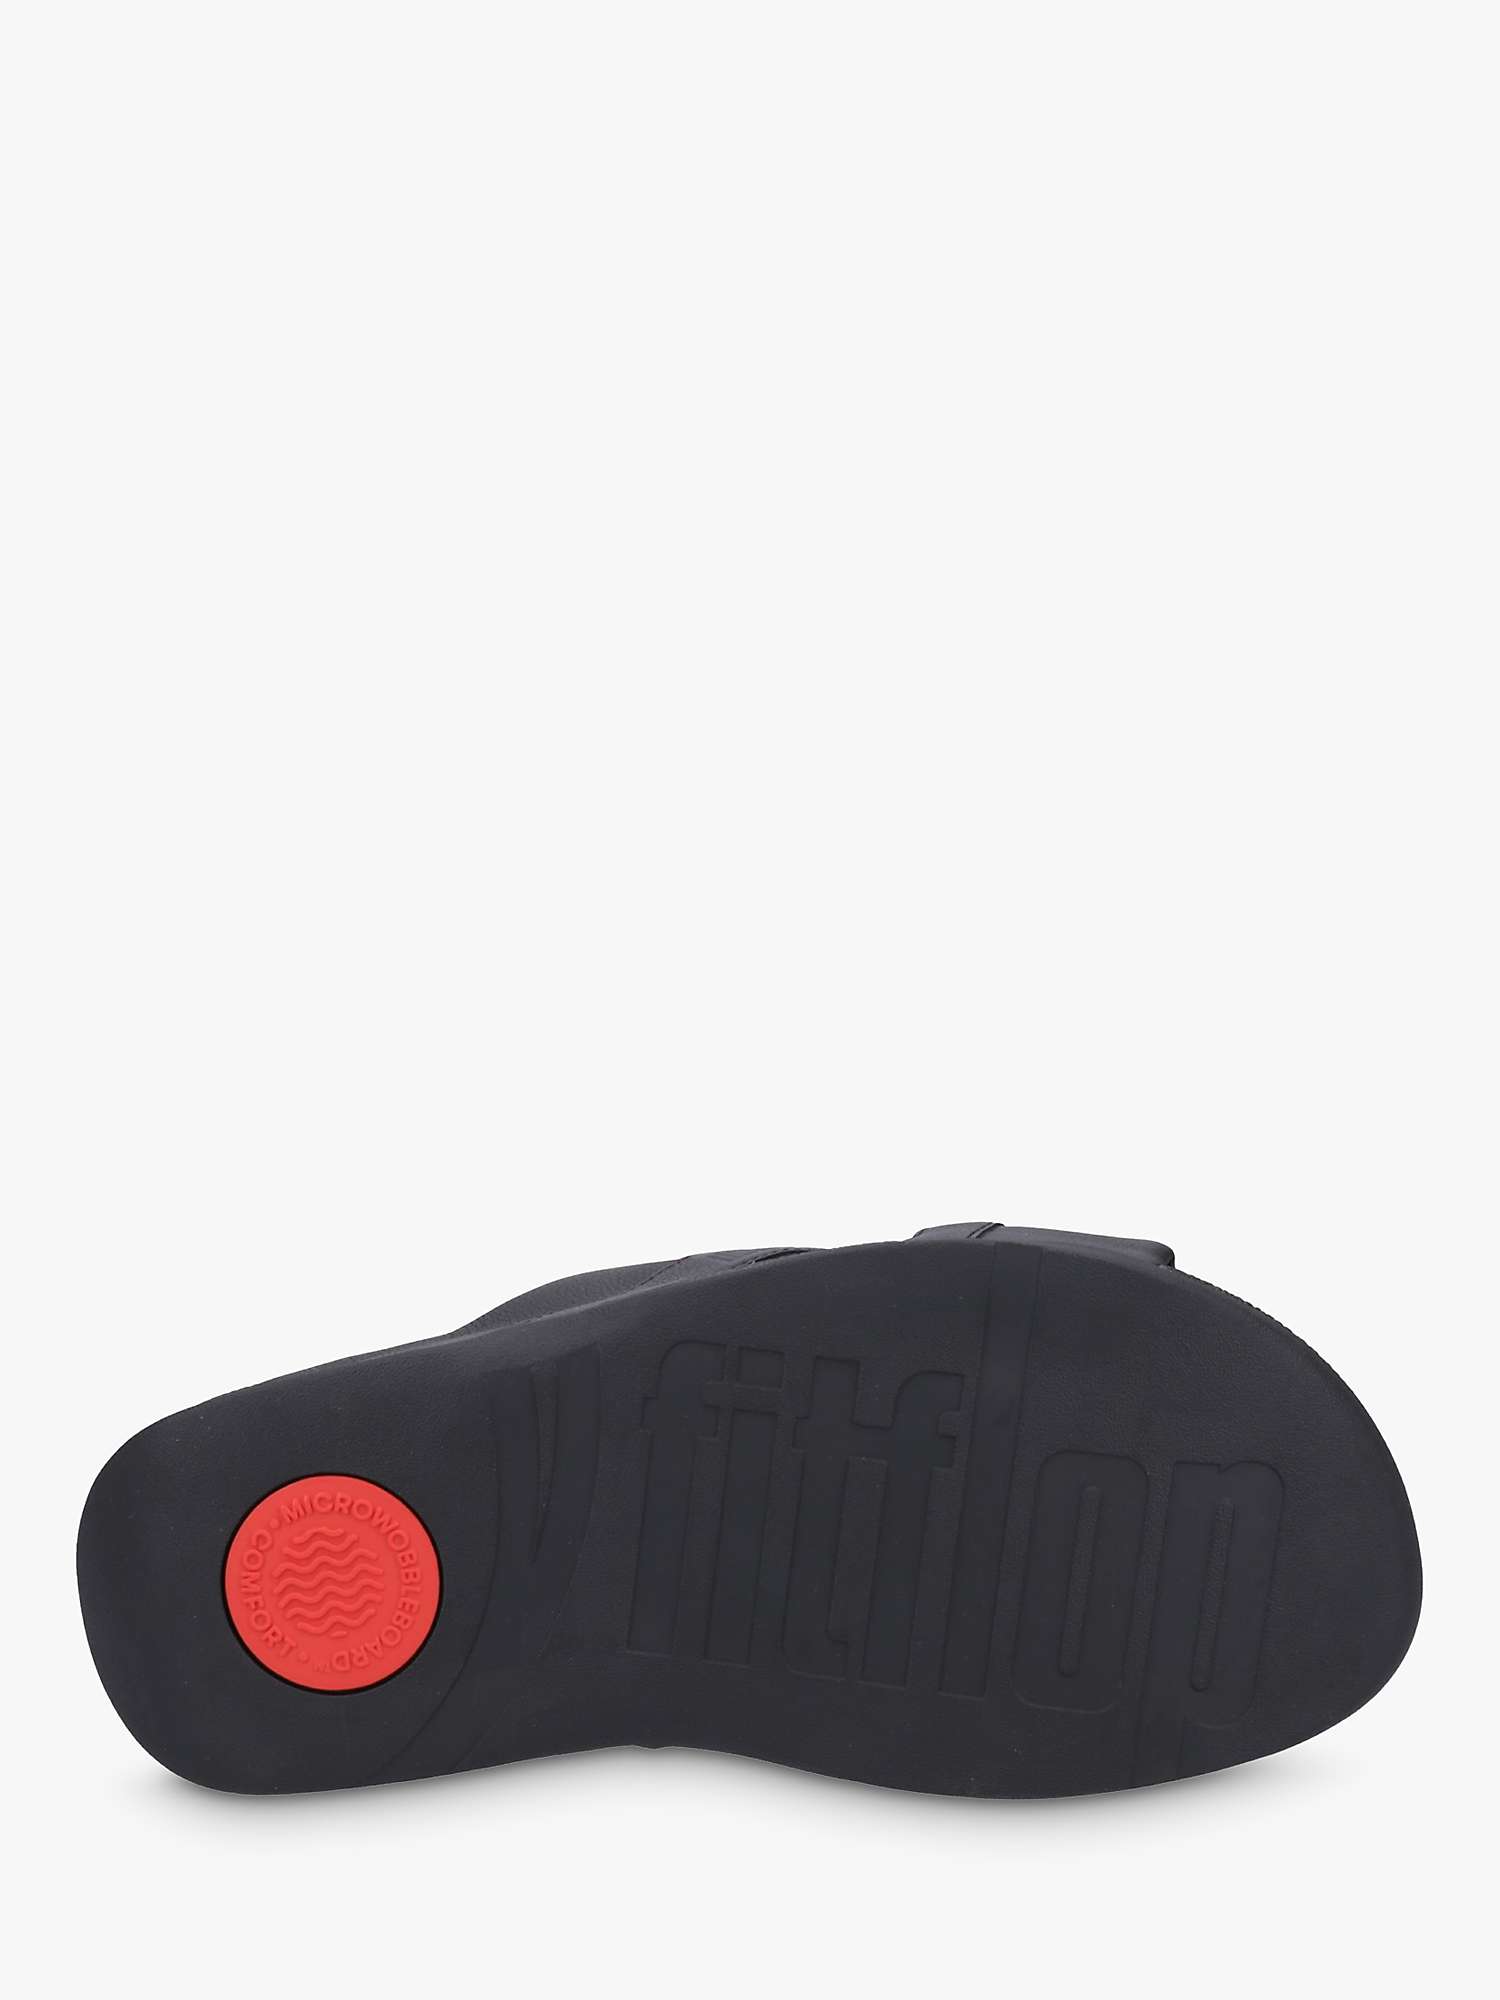 Buy FitFlop Freeway Leather Sliders Online at johnlewis.com